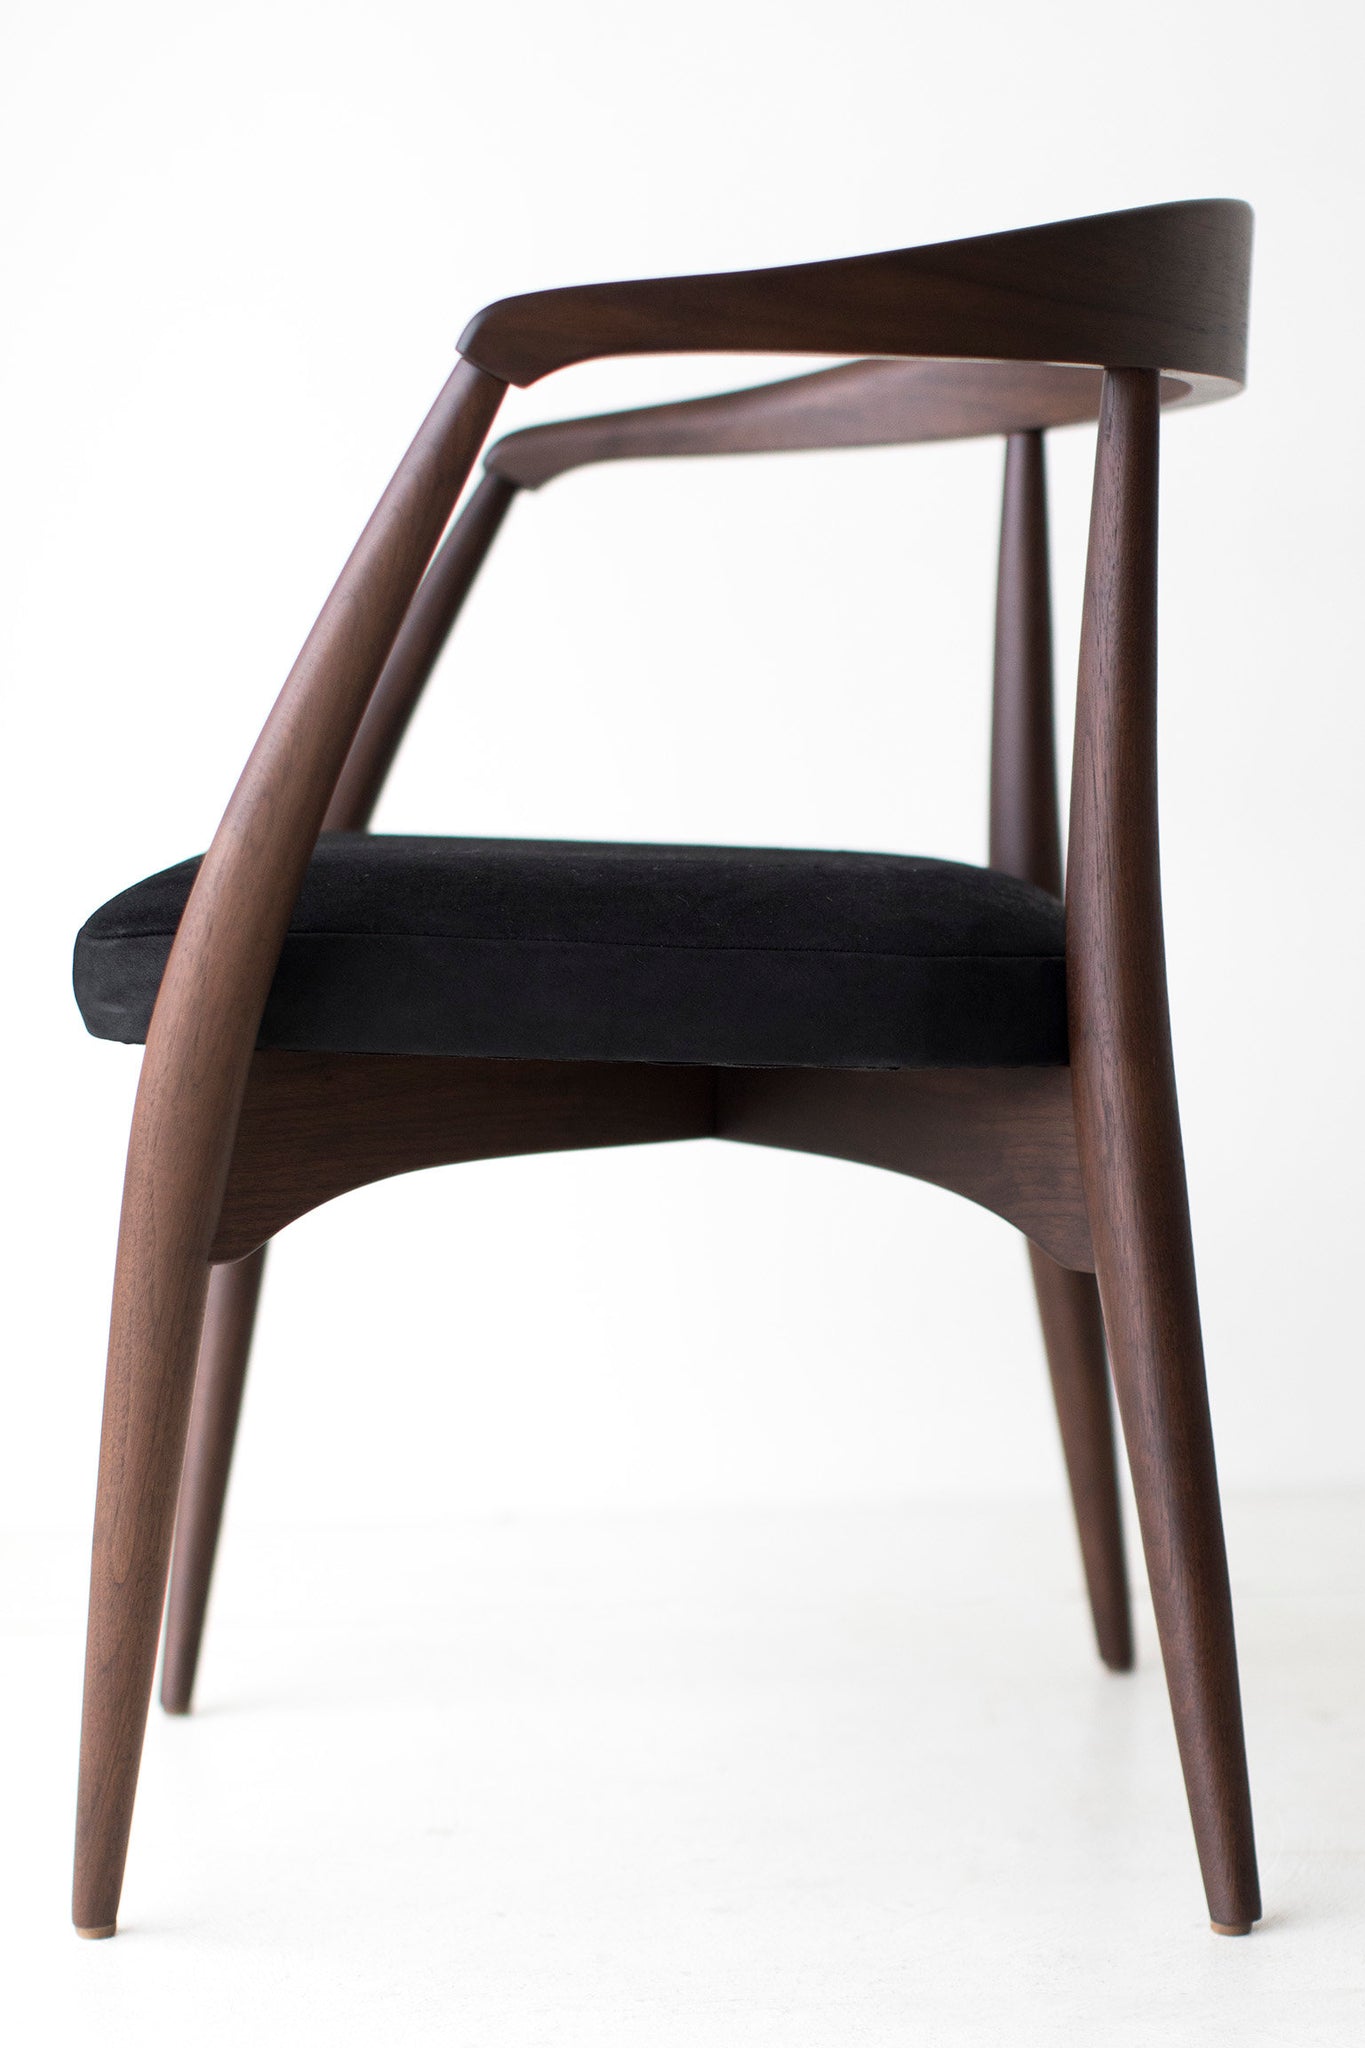 lawrence-peabody-dining-chairs-09